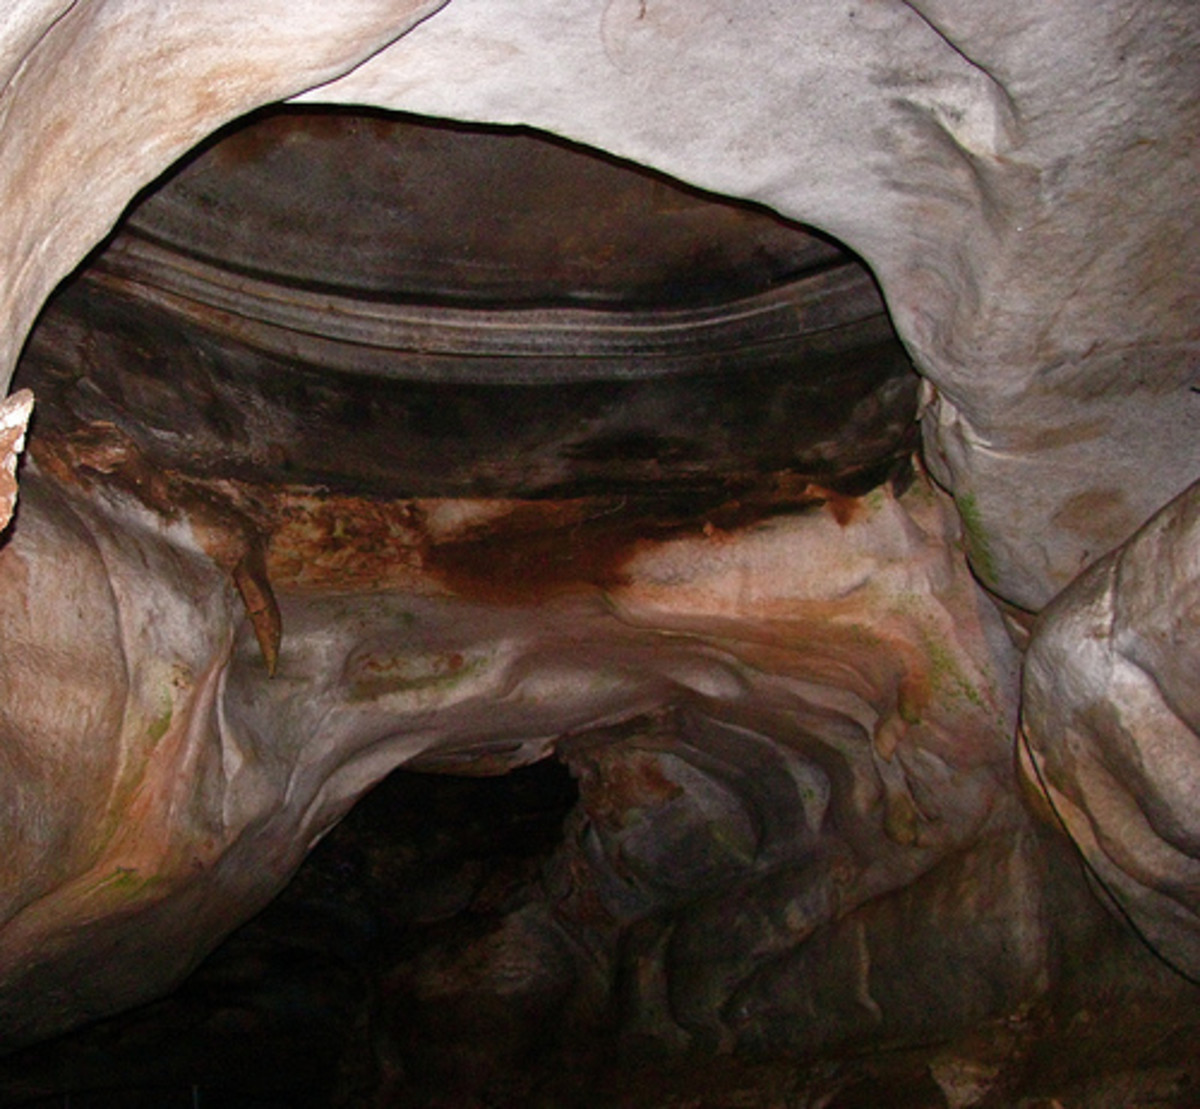 Oklahoma Caves: The Alabaster Caverns were once filled with water from a great sea.  This picture illustrates the erosion patterns that the water has carved from the cave walls.